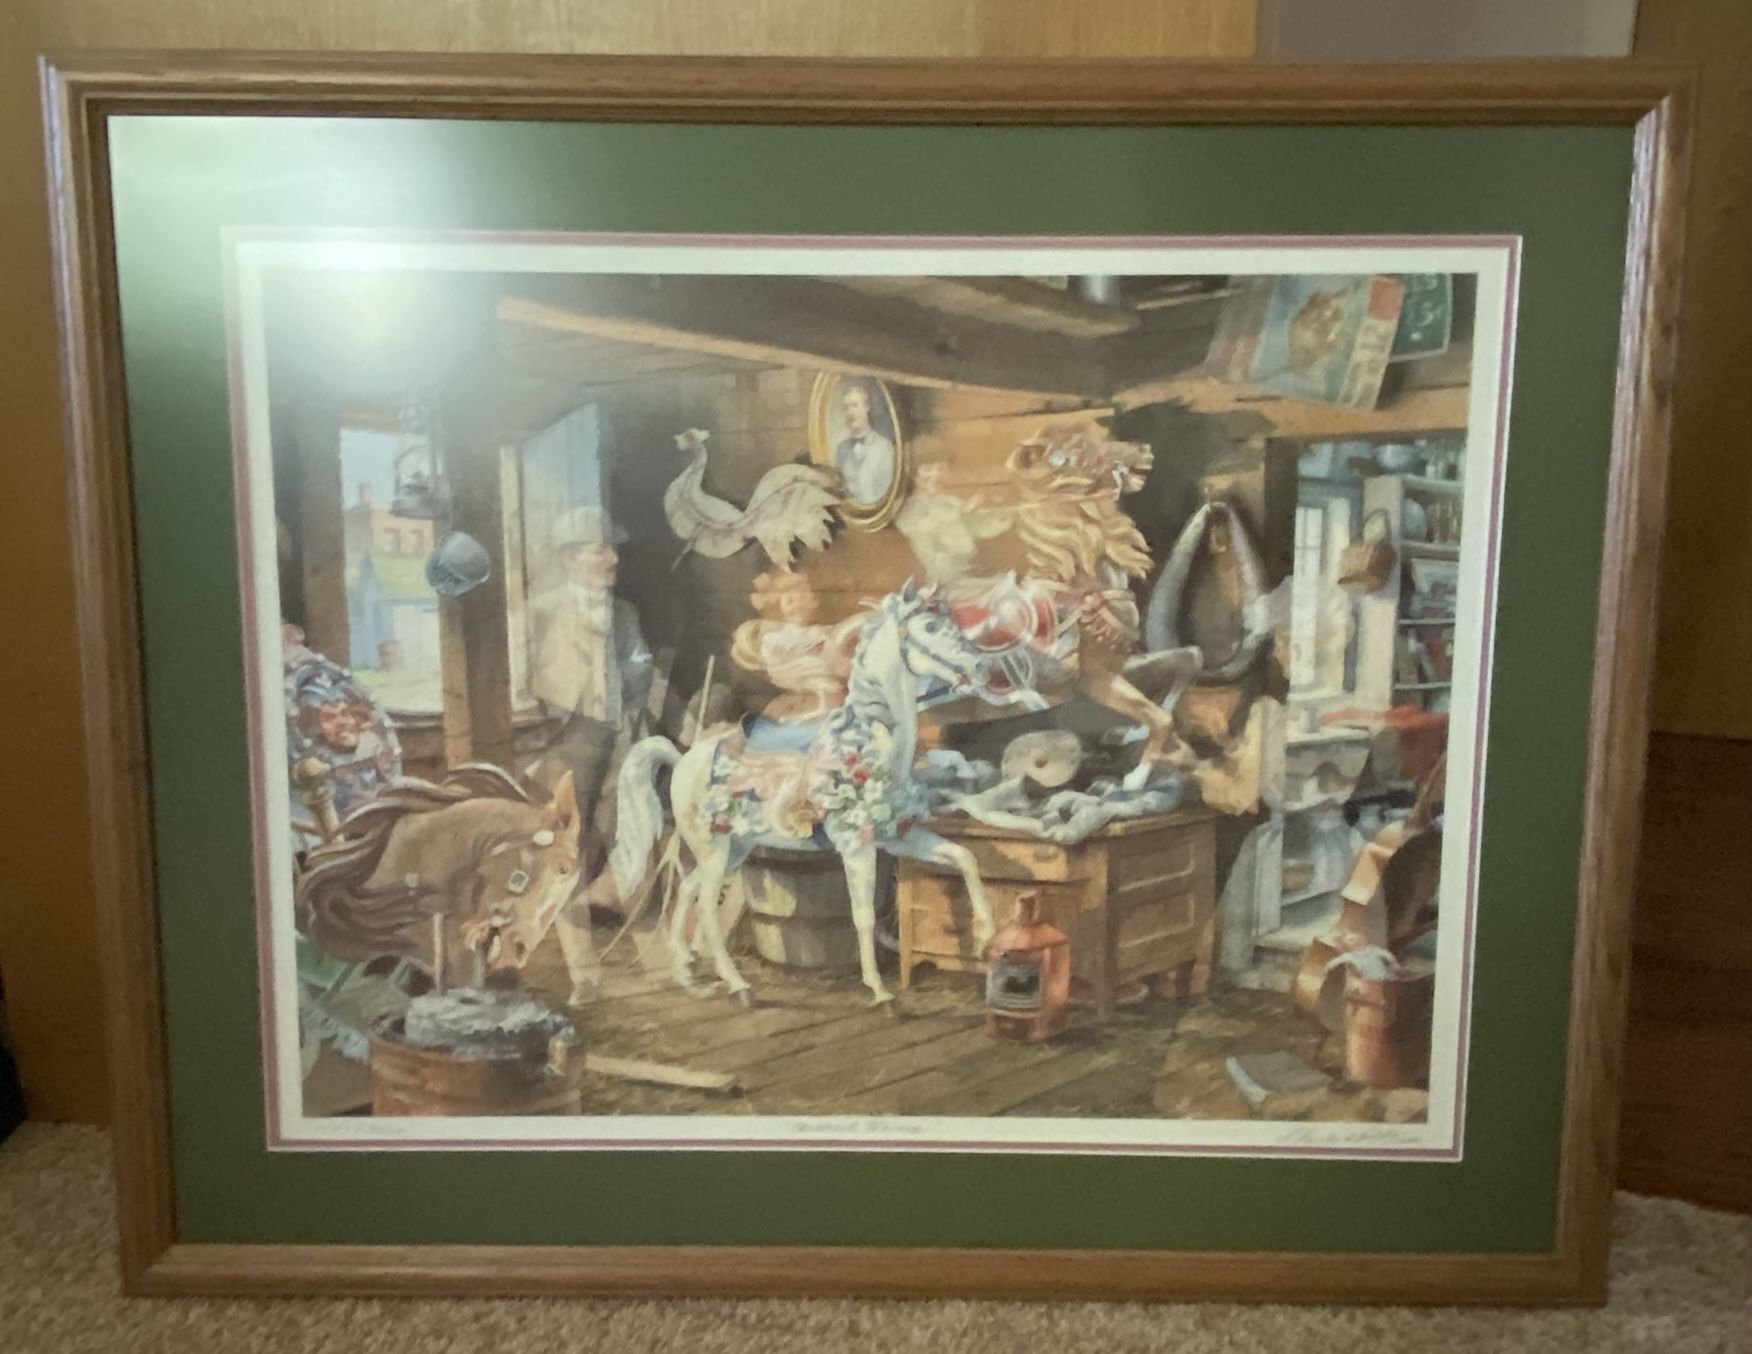 Charles Peterson Carousel Horses Collectors Edition Framed Print